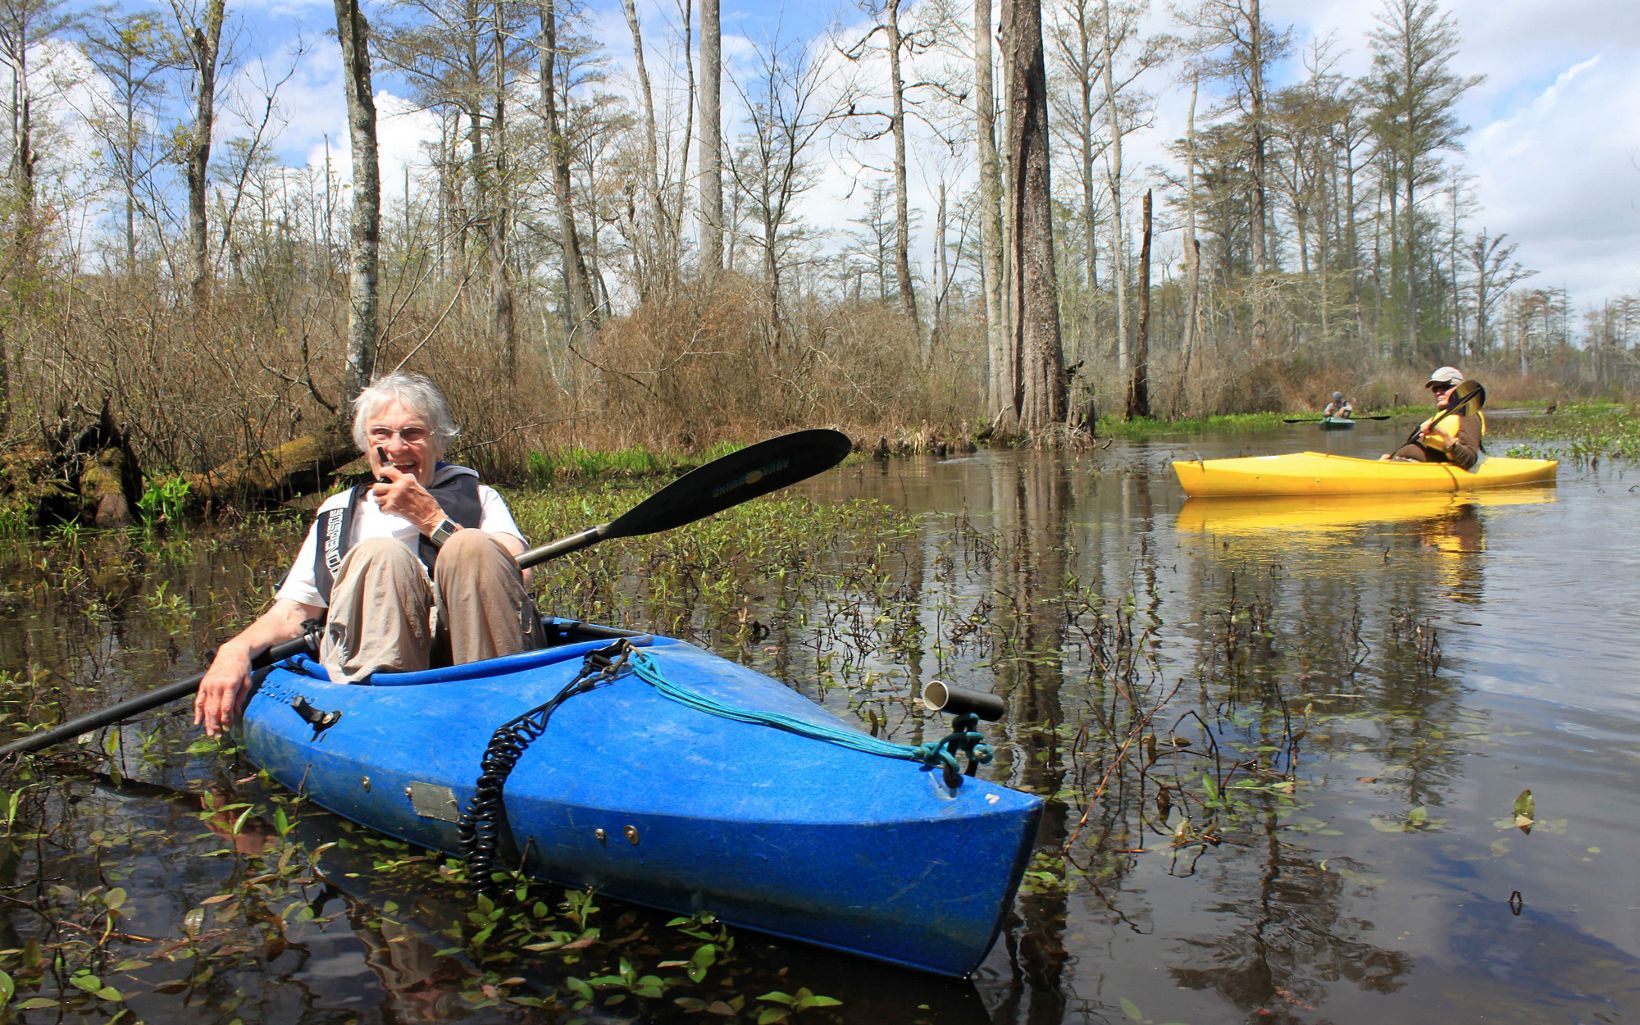 A smiling woman sits with her knees drawn up in front of her in a blue kayak. Green submerged vegetation floats beneath her. A man in a yellow kayak is behind her.